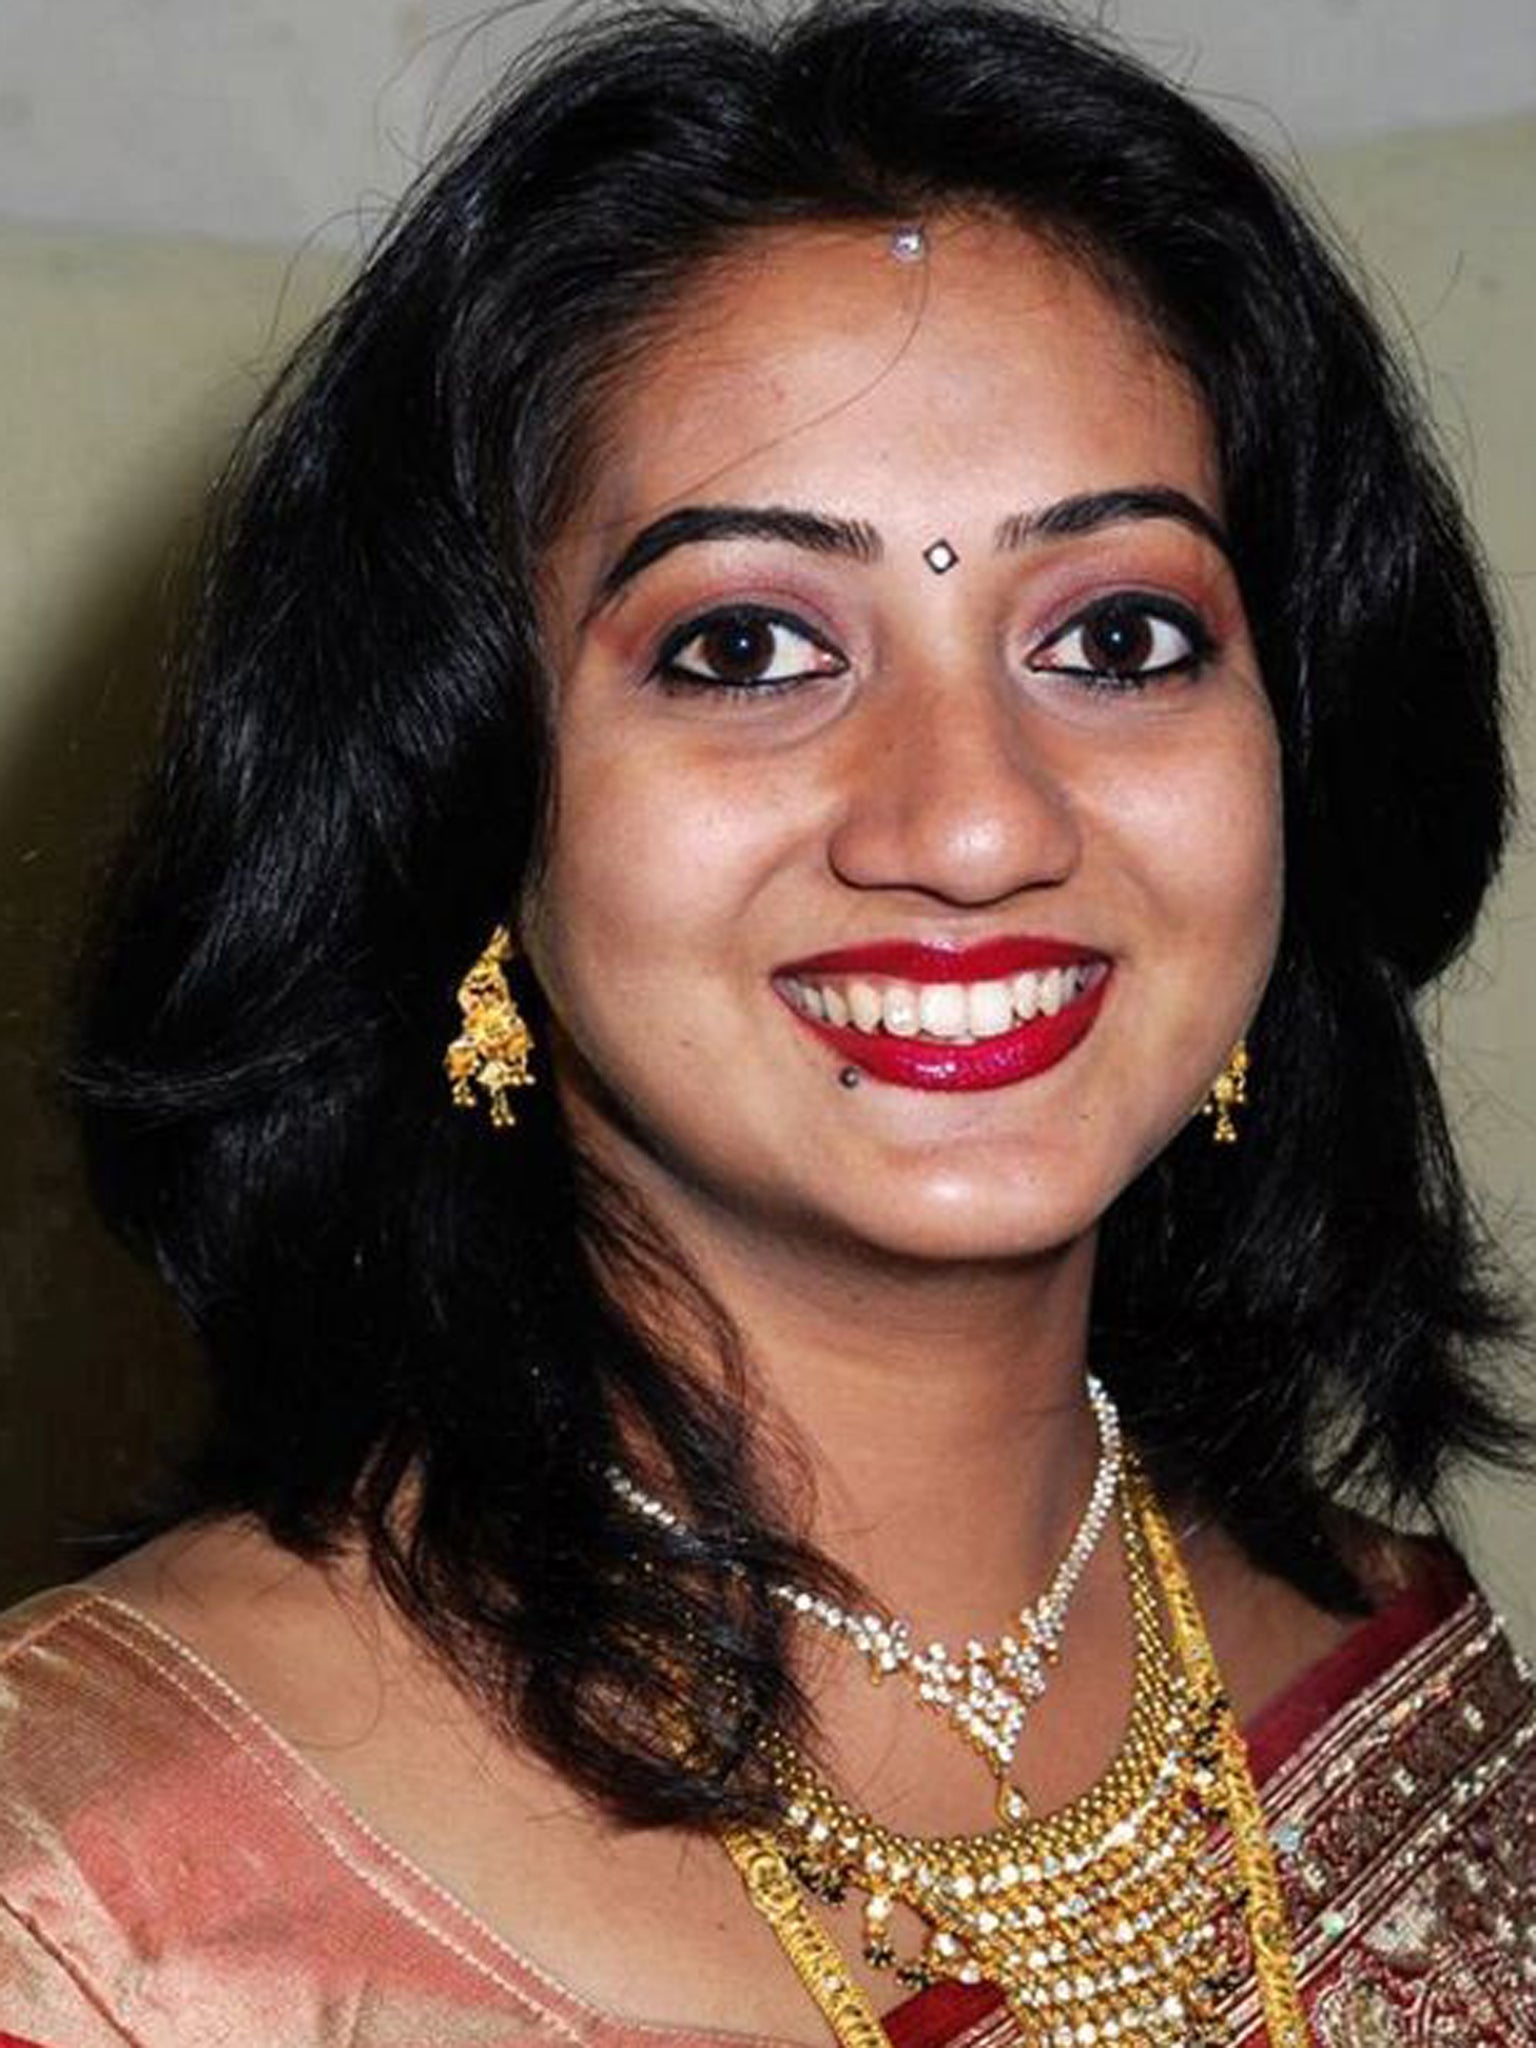 Savita Halappanavar was 17 weeks pregnant when she was admitted to University Hospital Galway on October 21 last year and died a week later from suspected septicaemia, days after she lost her baby